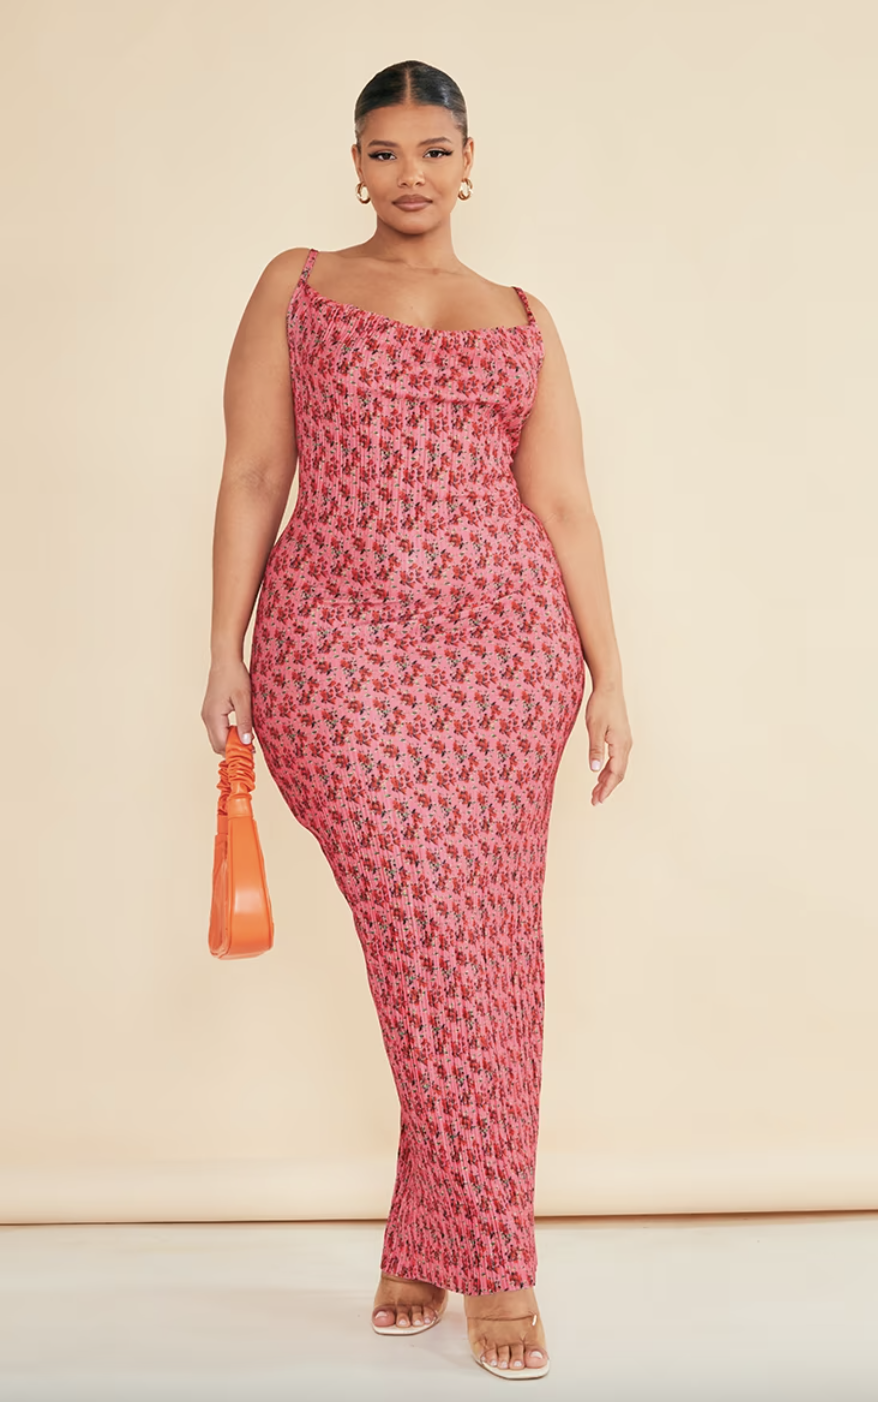 plus size model wearing pink and red maxi dress, Plus Rose Floral Printed Plisse Cowl Neck Maxi Dress (photo via PrettyLittleThing)